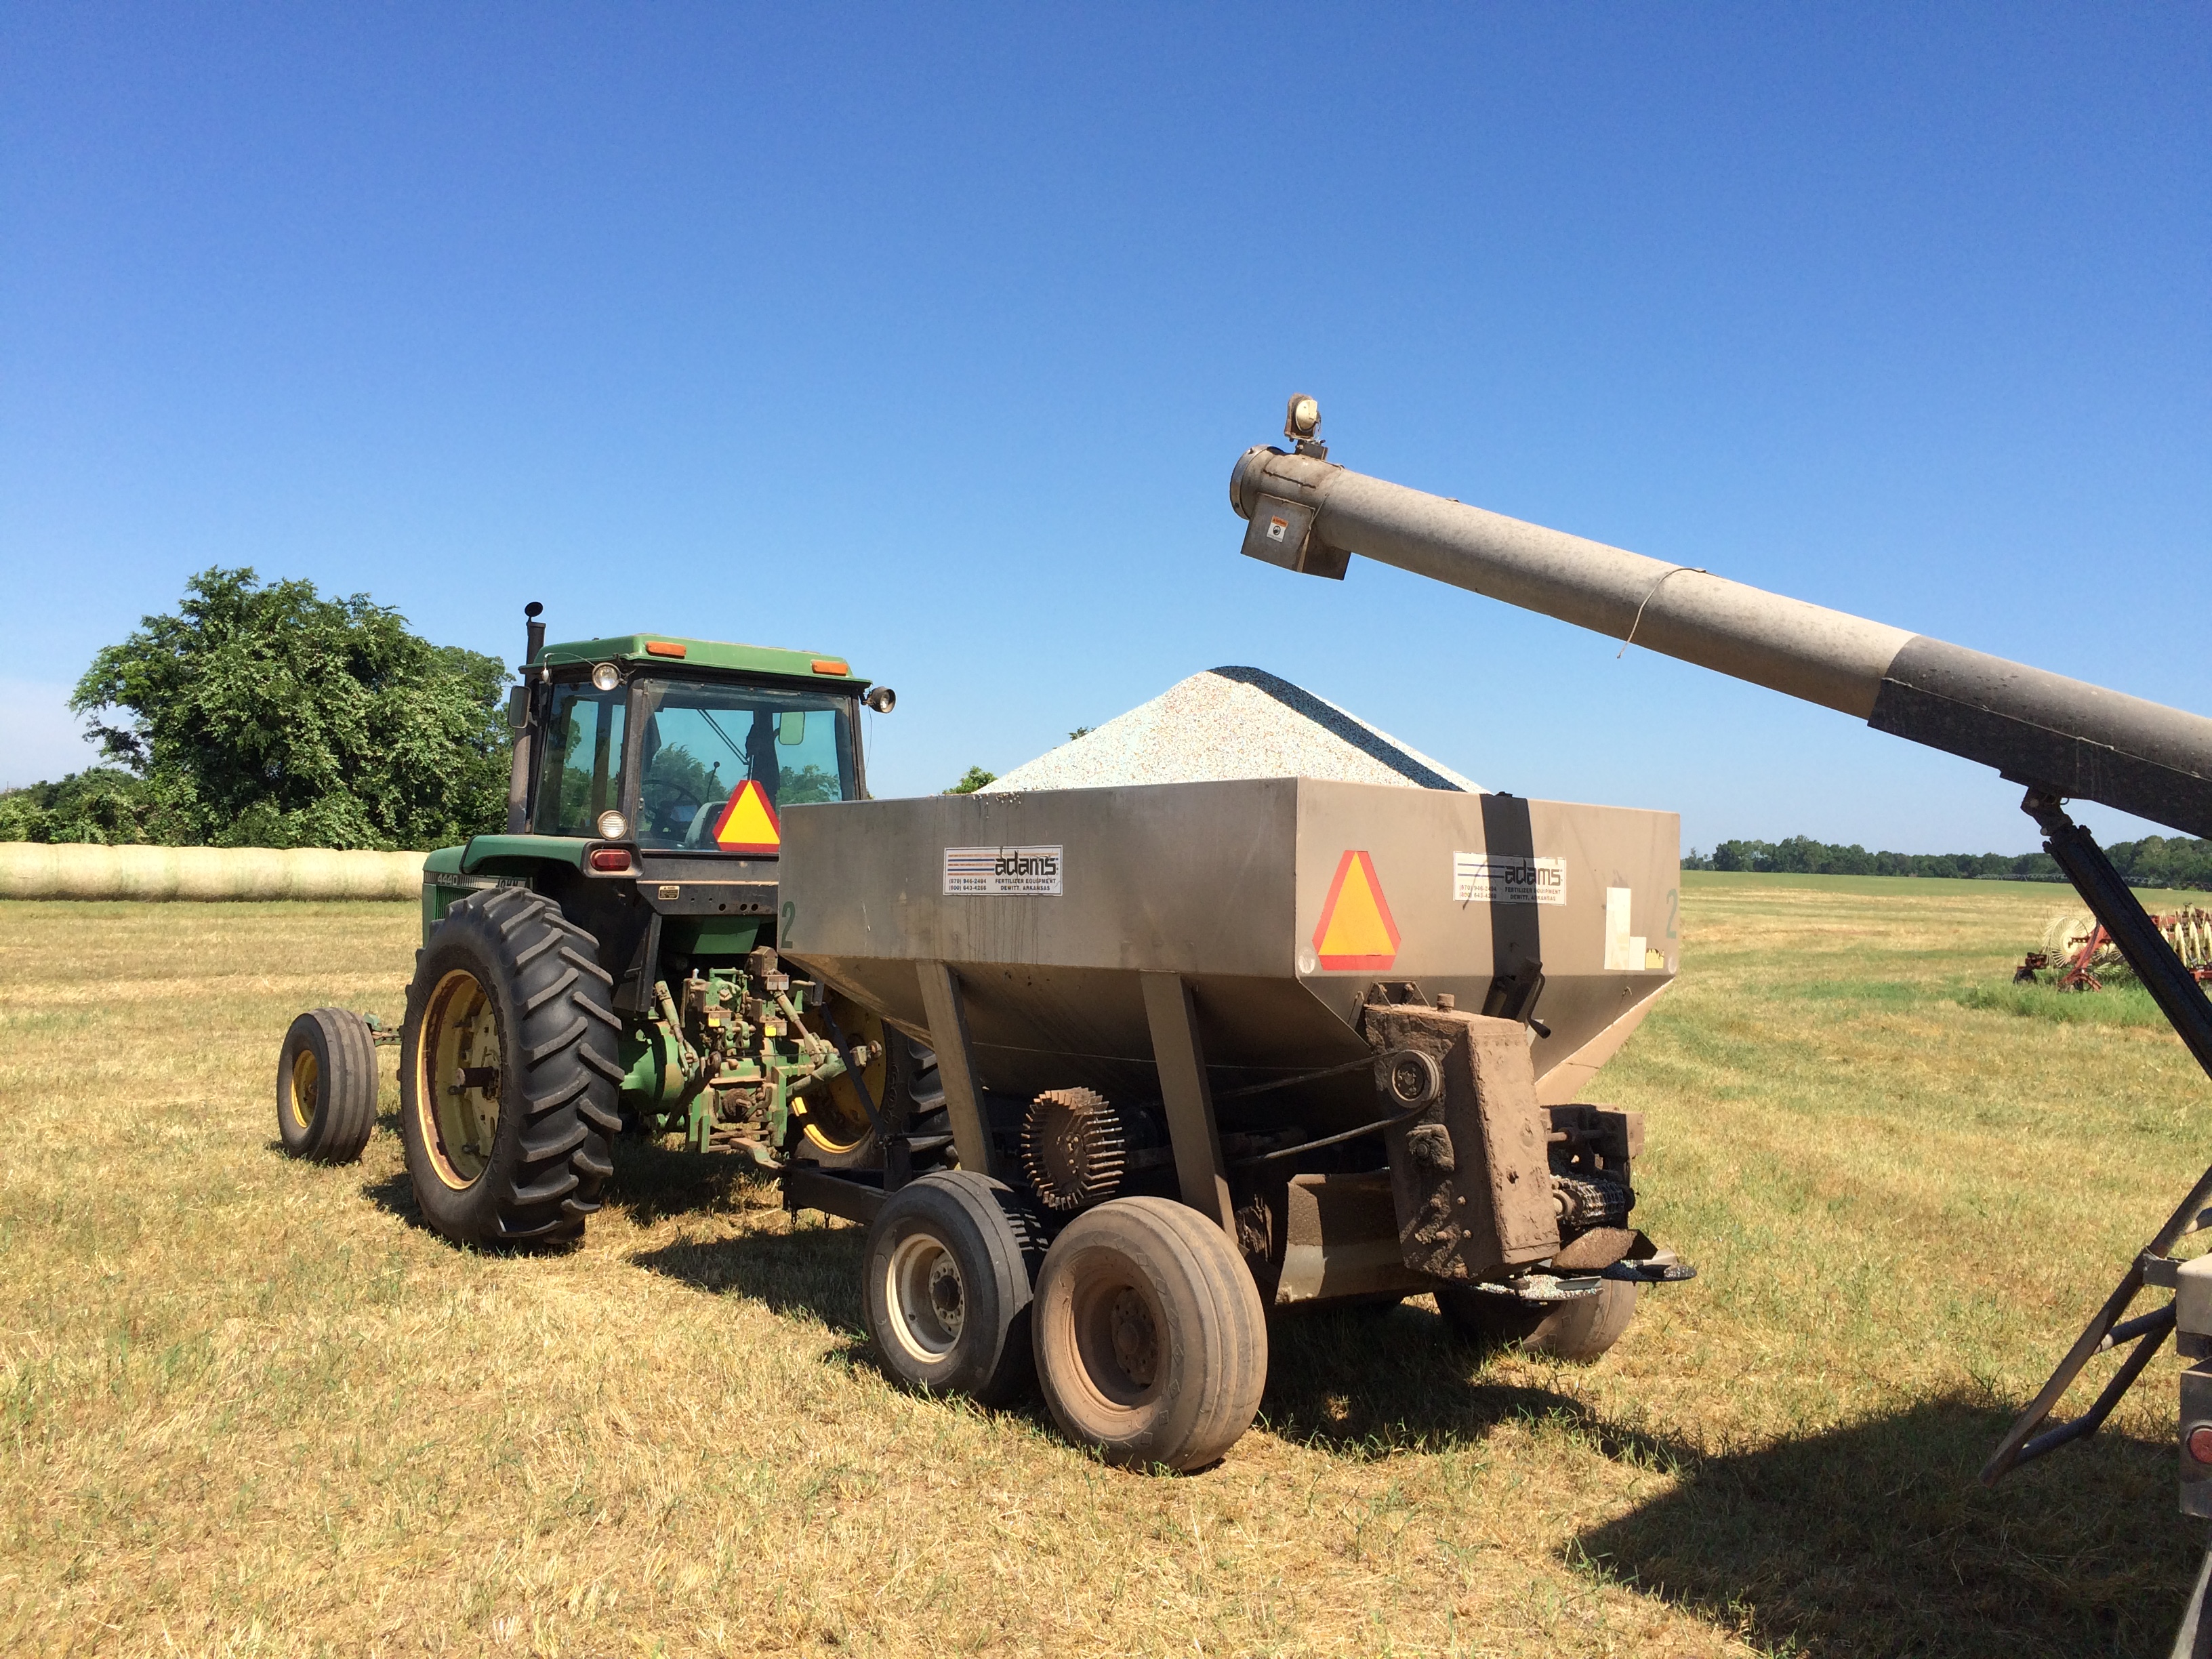 Loading of Fertilizer for applications to hay fields